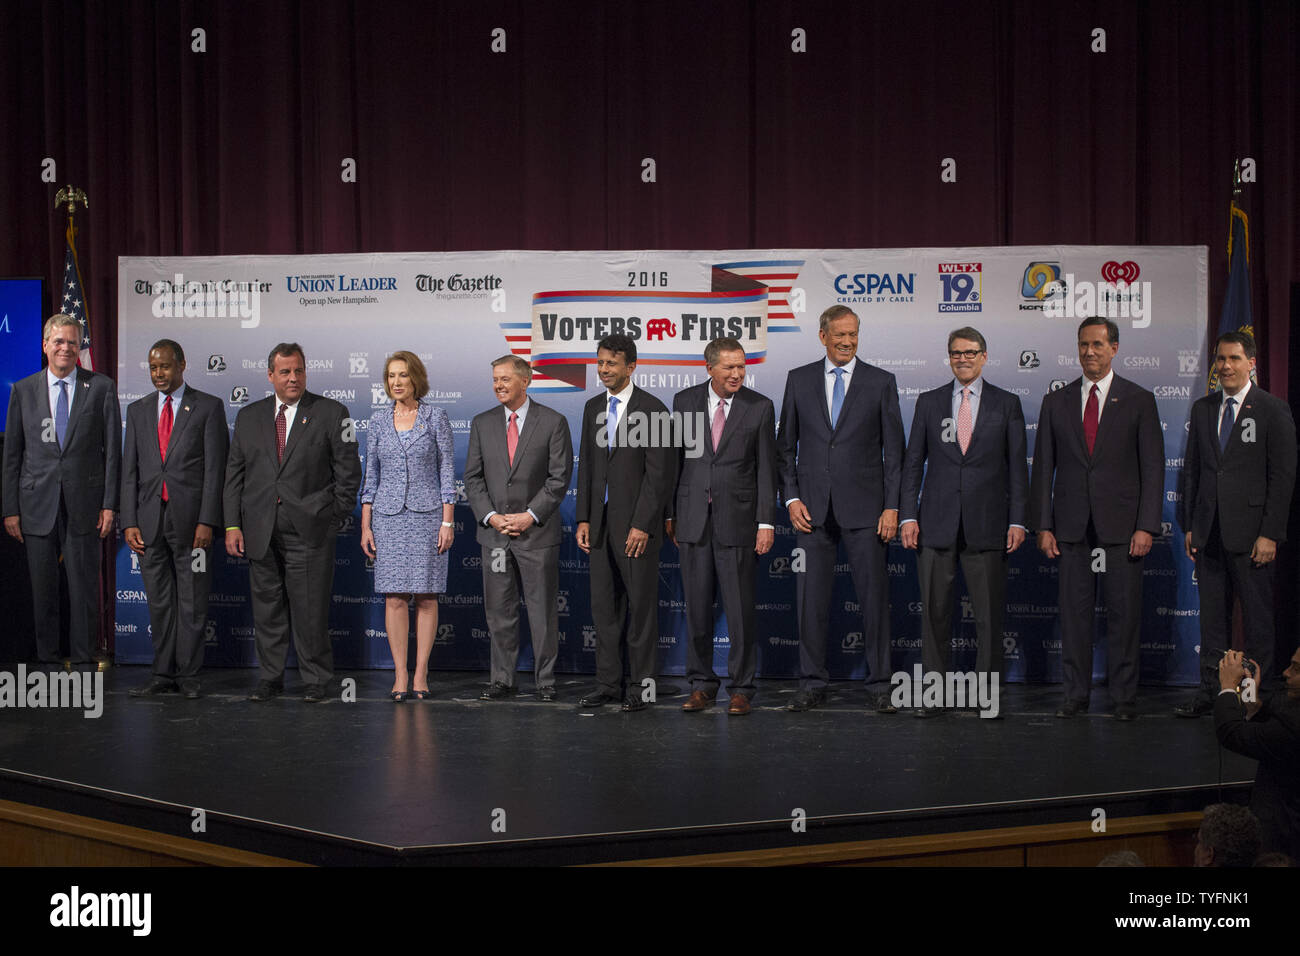 Republican presidential candidates, from left to right, Jeb Bush, Ben Carson, Gov. Chris Christie (R-NJ), Carly Fiorina, Sen. Lindsey Graham (R-NC), Gov. Bobby Jindal (R-LA), Gov. John Kasich (R-OH), George Pataki, Rick Perry, Rick Santorum and Gov. Scott Walker (R-WI), arrive on stage for the Voters First forum at St. Anselm College in Manchester, New Hampshire on August 3, 2015. Fourteen Republican presidential candidates, three via satellite,  excluding Donald Trump, participated in the forum which kicked off the Presidential debate schedule for the 2016 presidential election. Photo by Matt Stock Photo